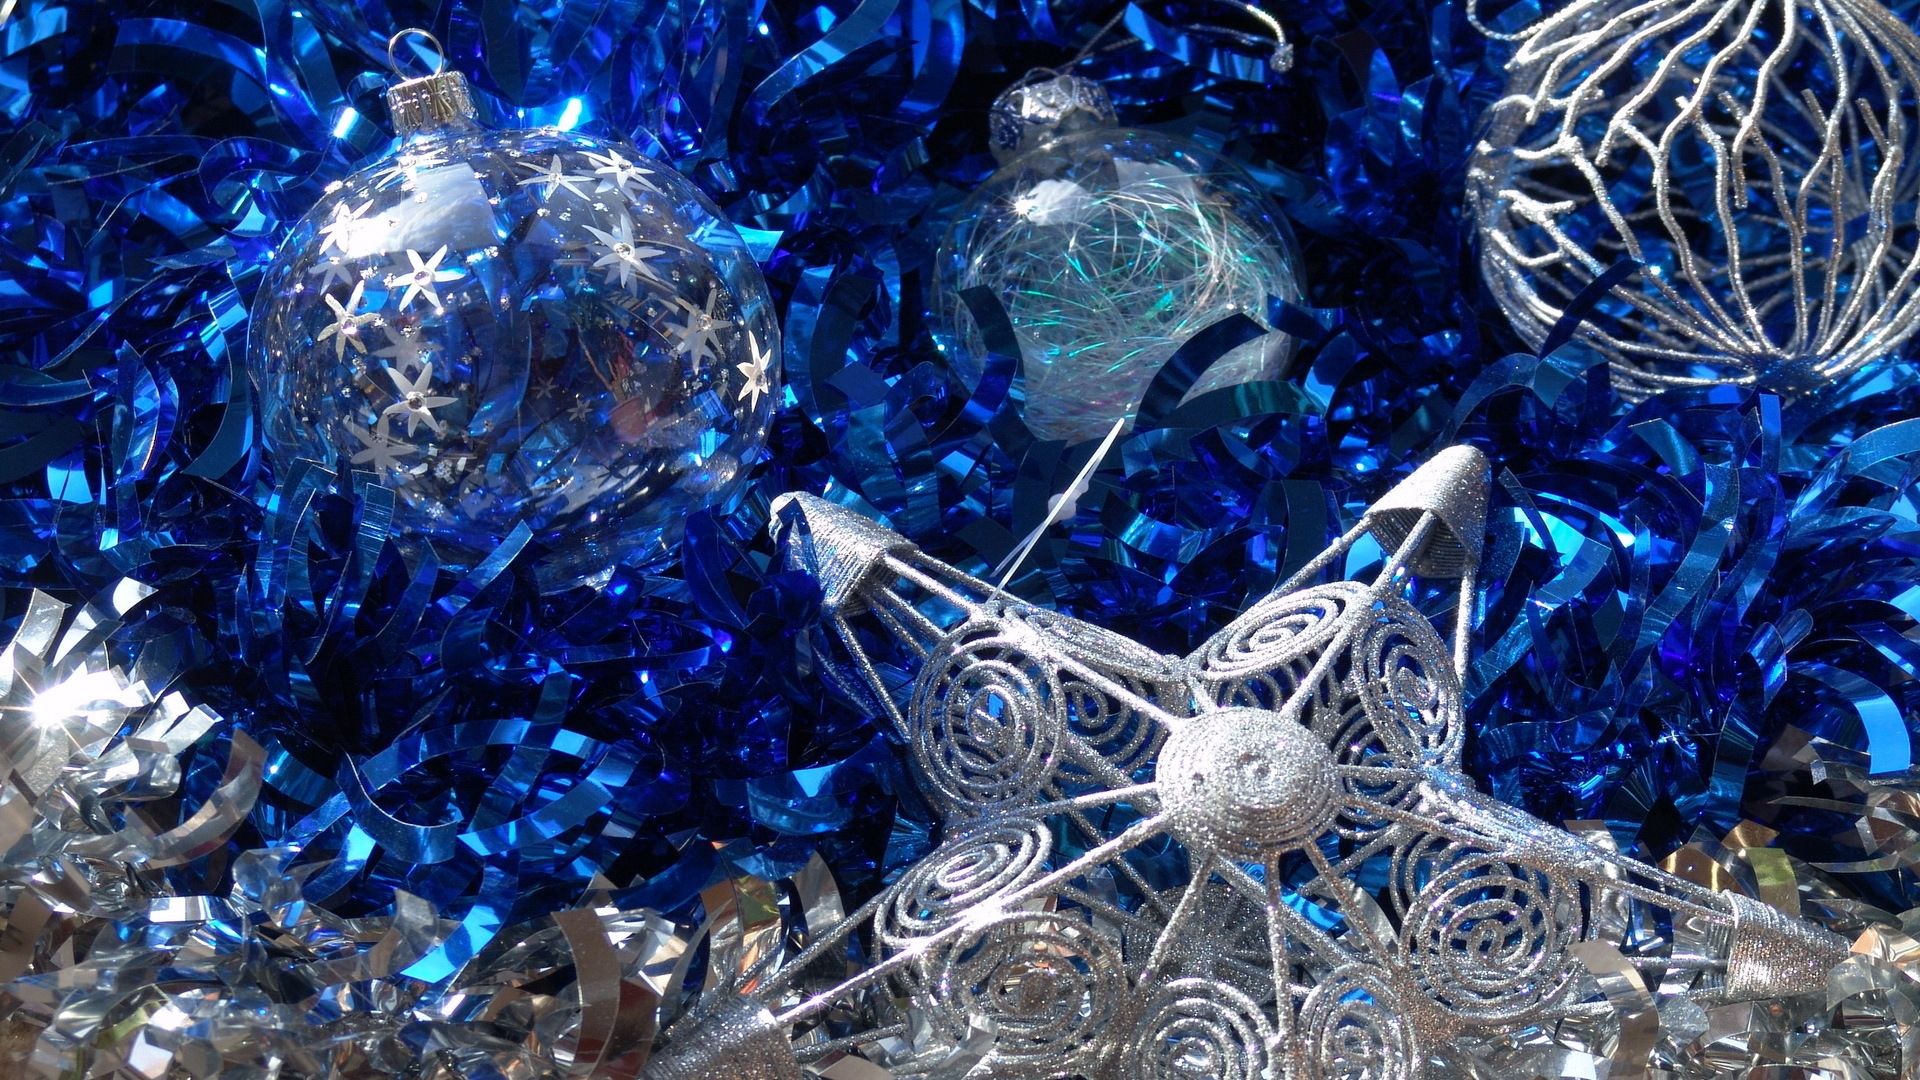 Silver and blue ornaments wallpaper. Silver and blue ornaments